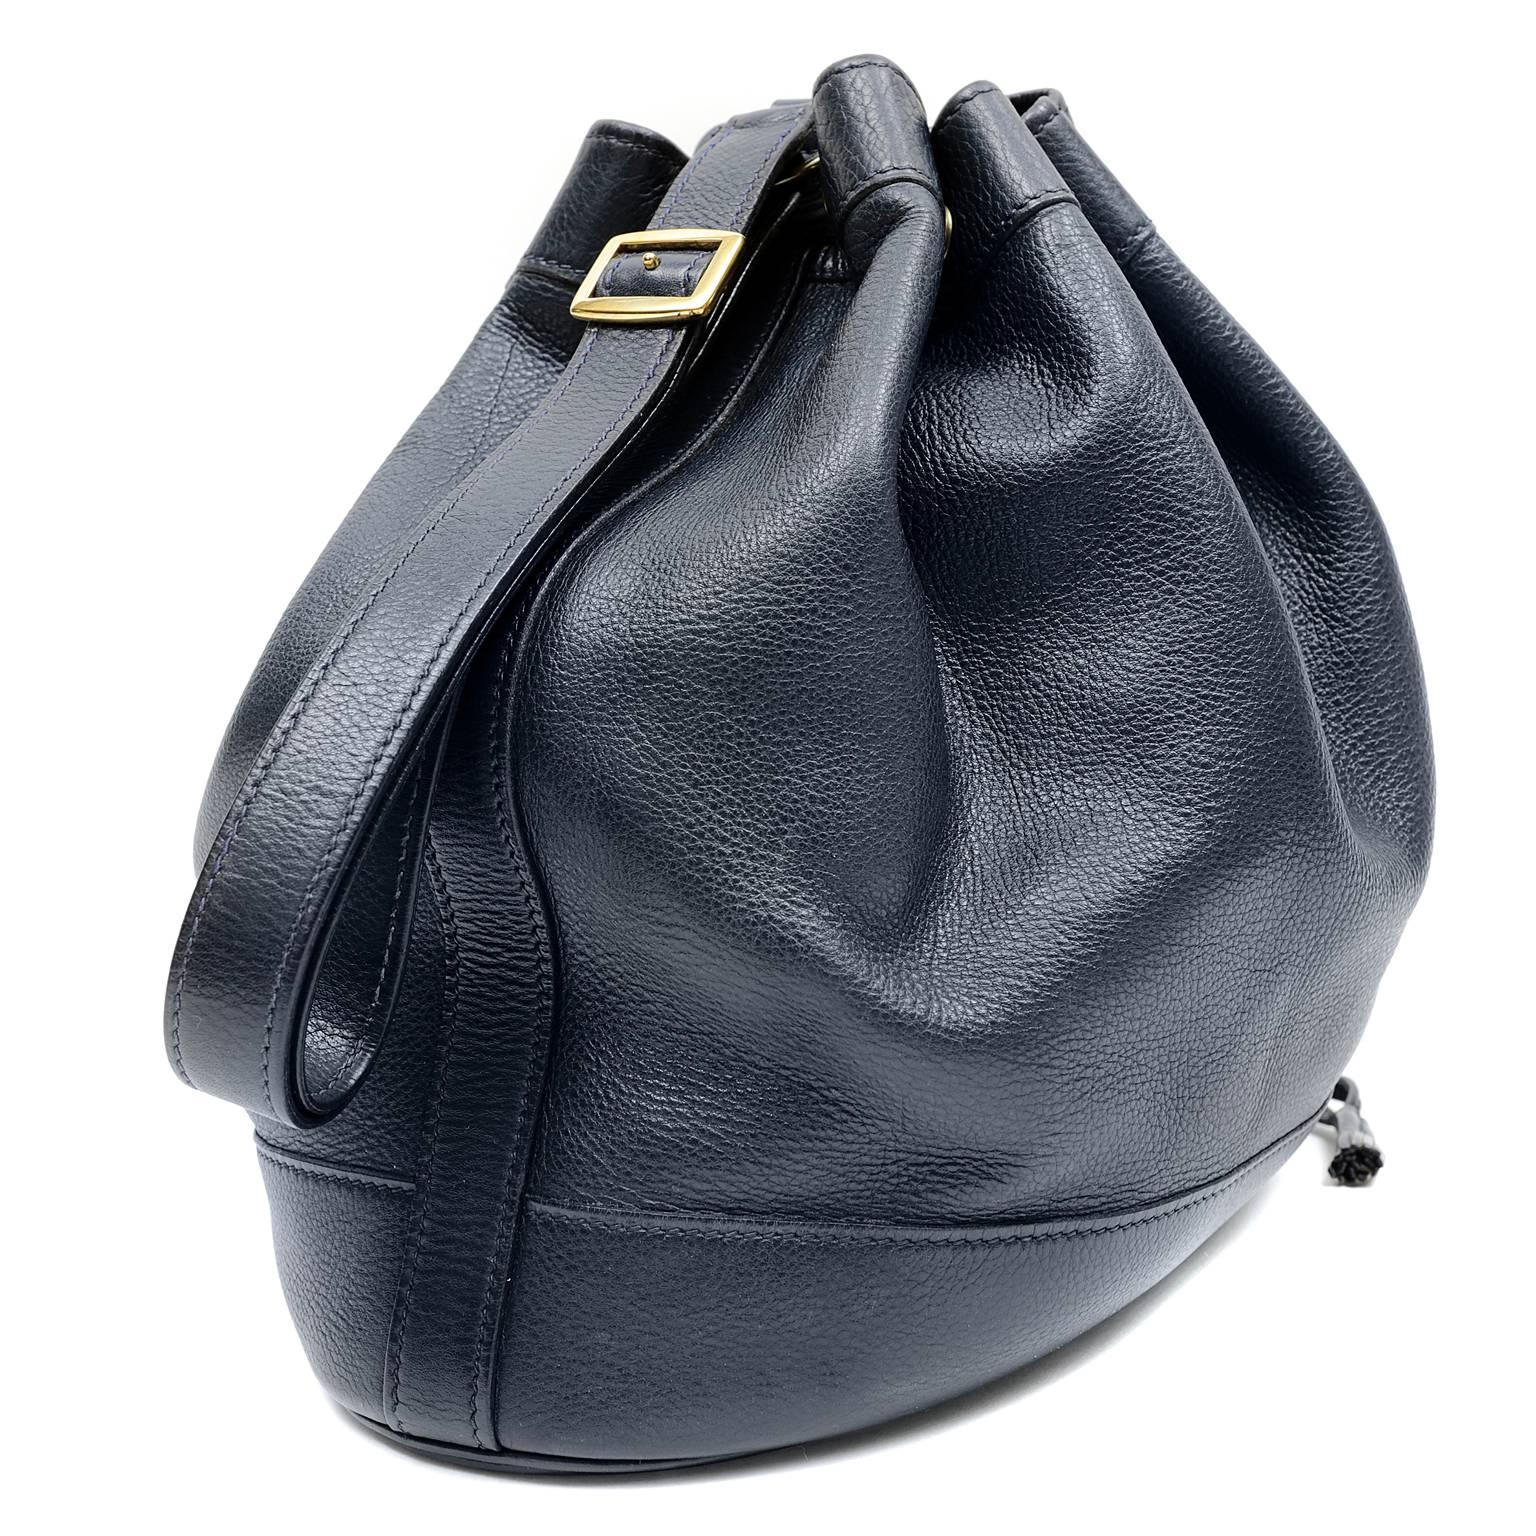 Hermès Indigo Leather Market Bag - Excellent Plus Vintage Condition; appears rarely carried and carefully stored.  
The classic silhouette is a drawstring bucket bag; perfect for every day enjoyment. 
 
Deep blue textured leather bucket bag